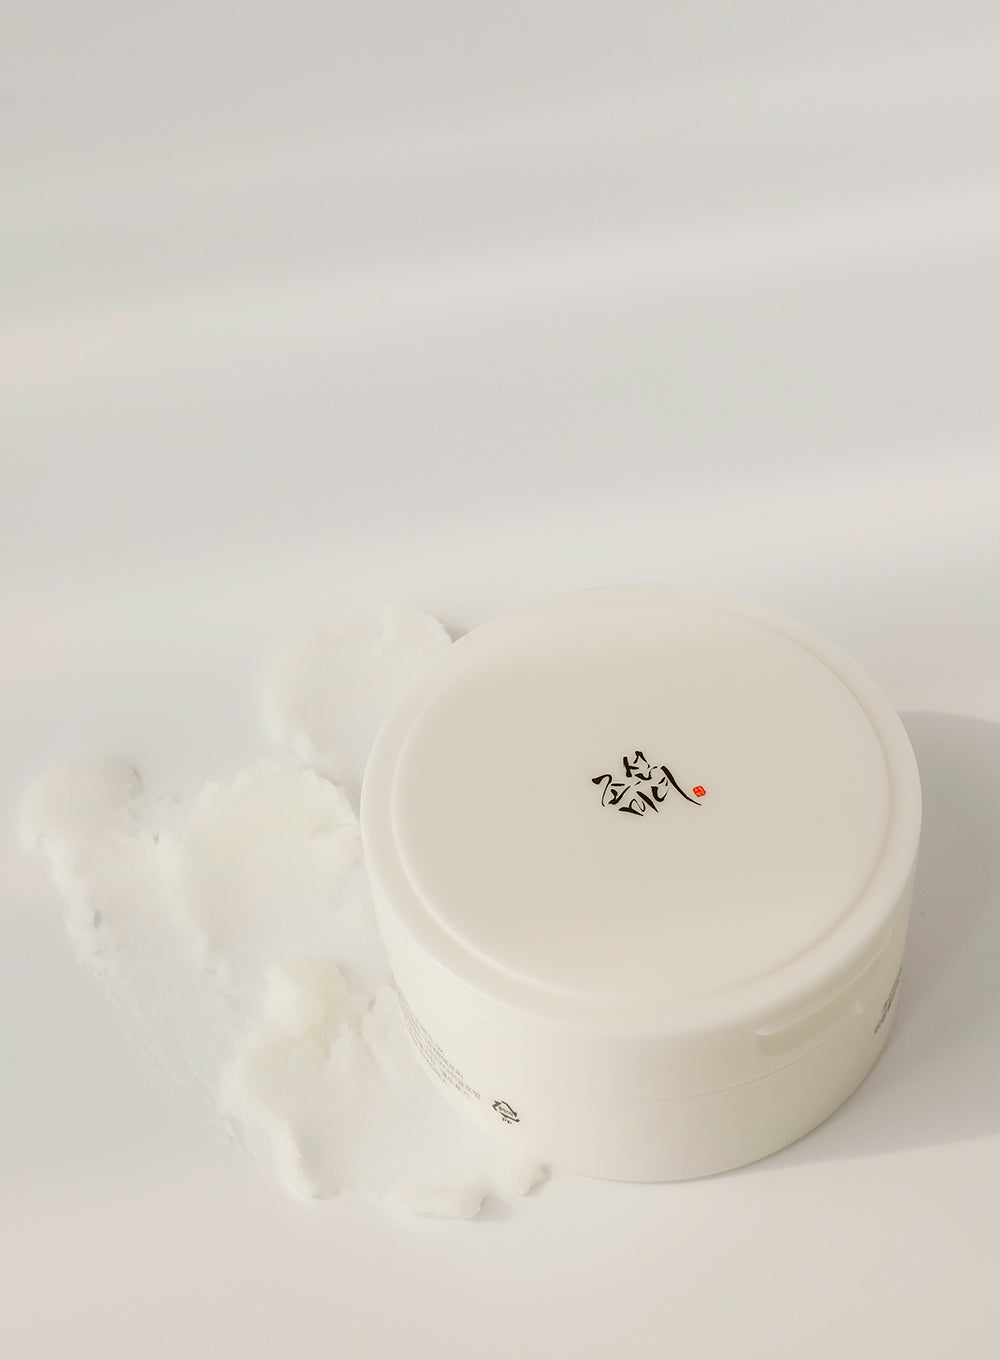 Beauty-of-Joseon-Radiance-Cleansing-Balm-baume-demaquillant-huile-kbeauty-cosmetique-coreen-seoulmate-2